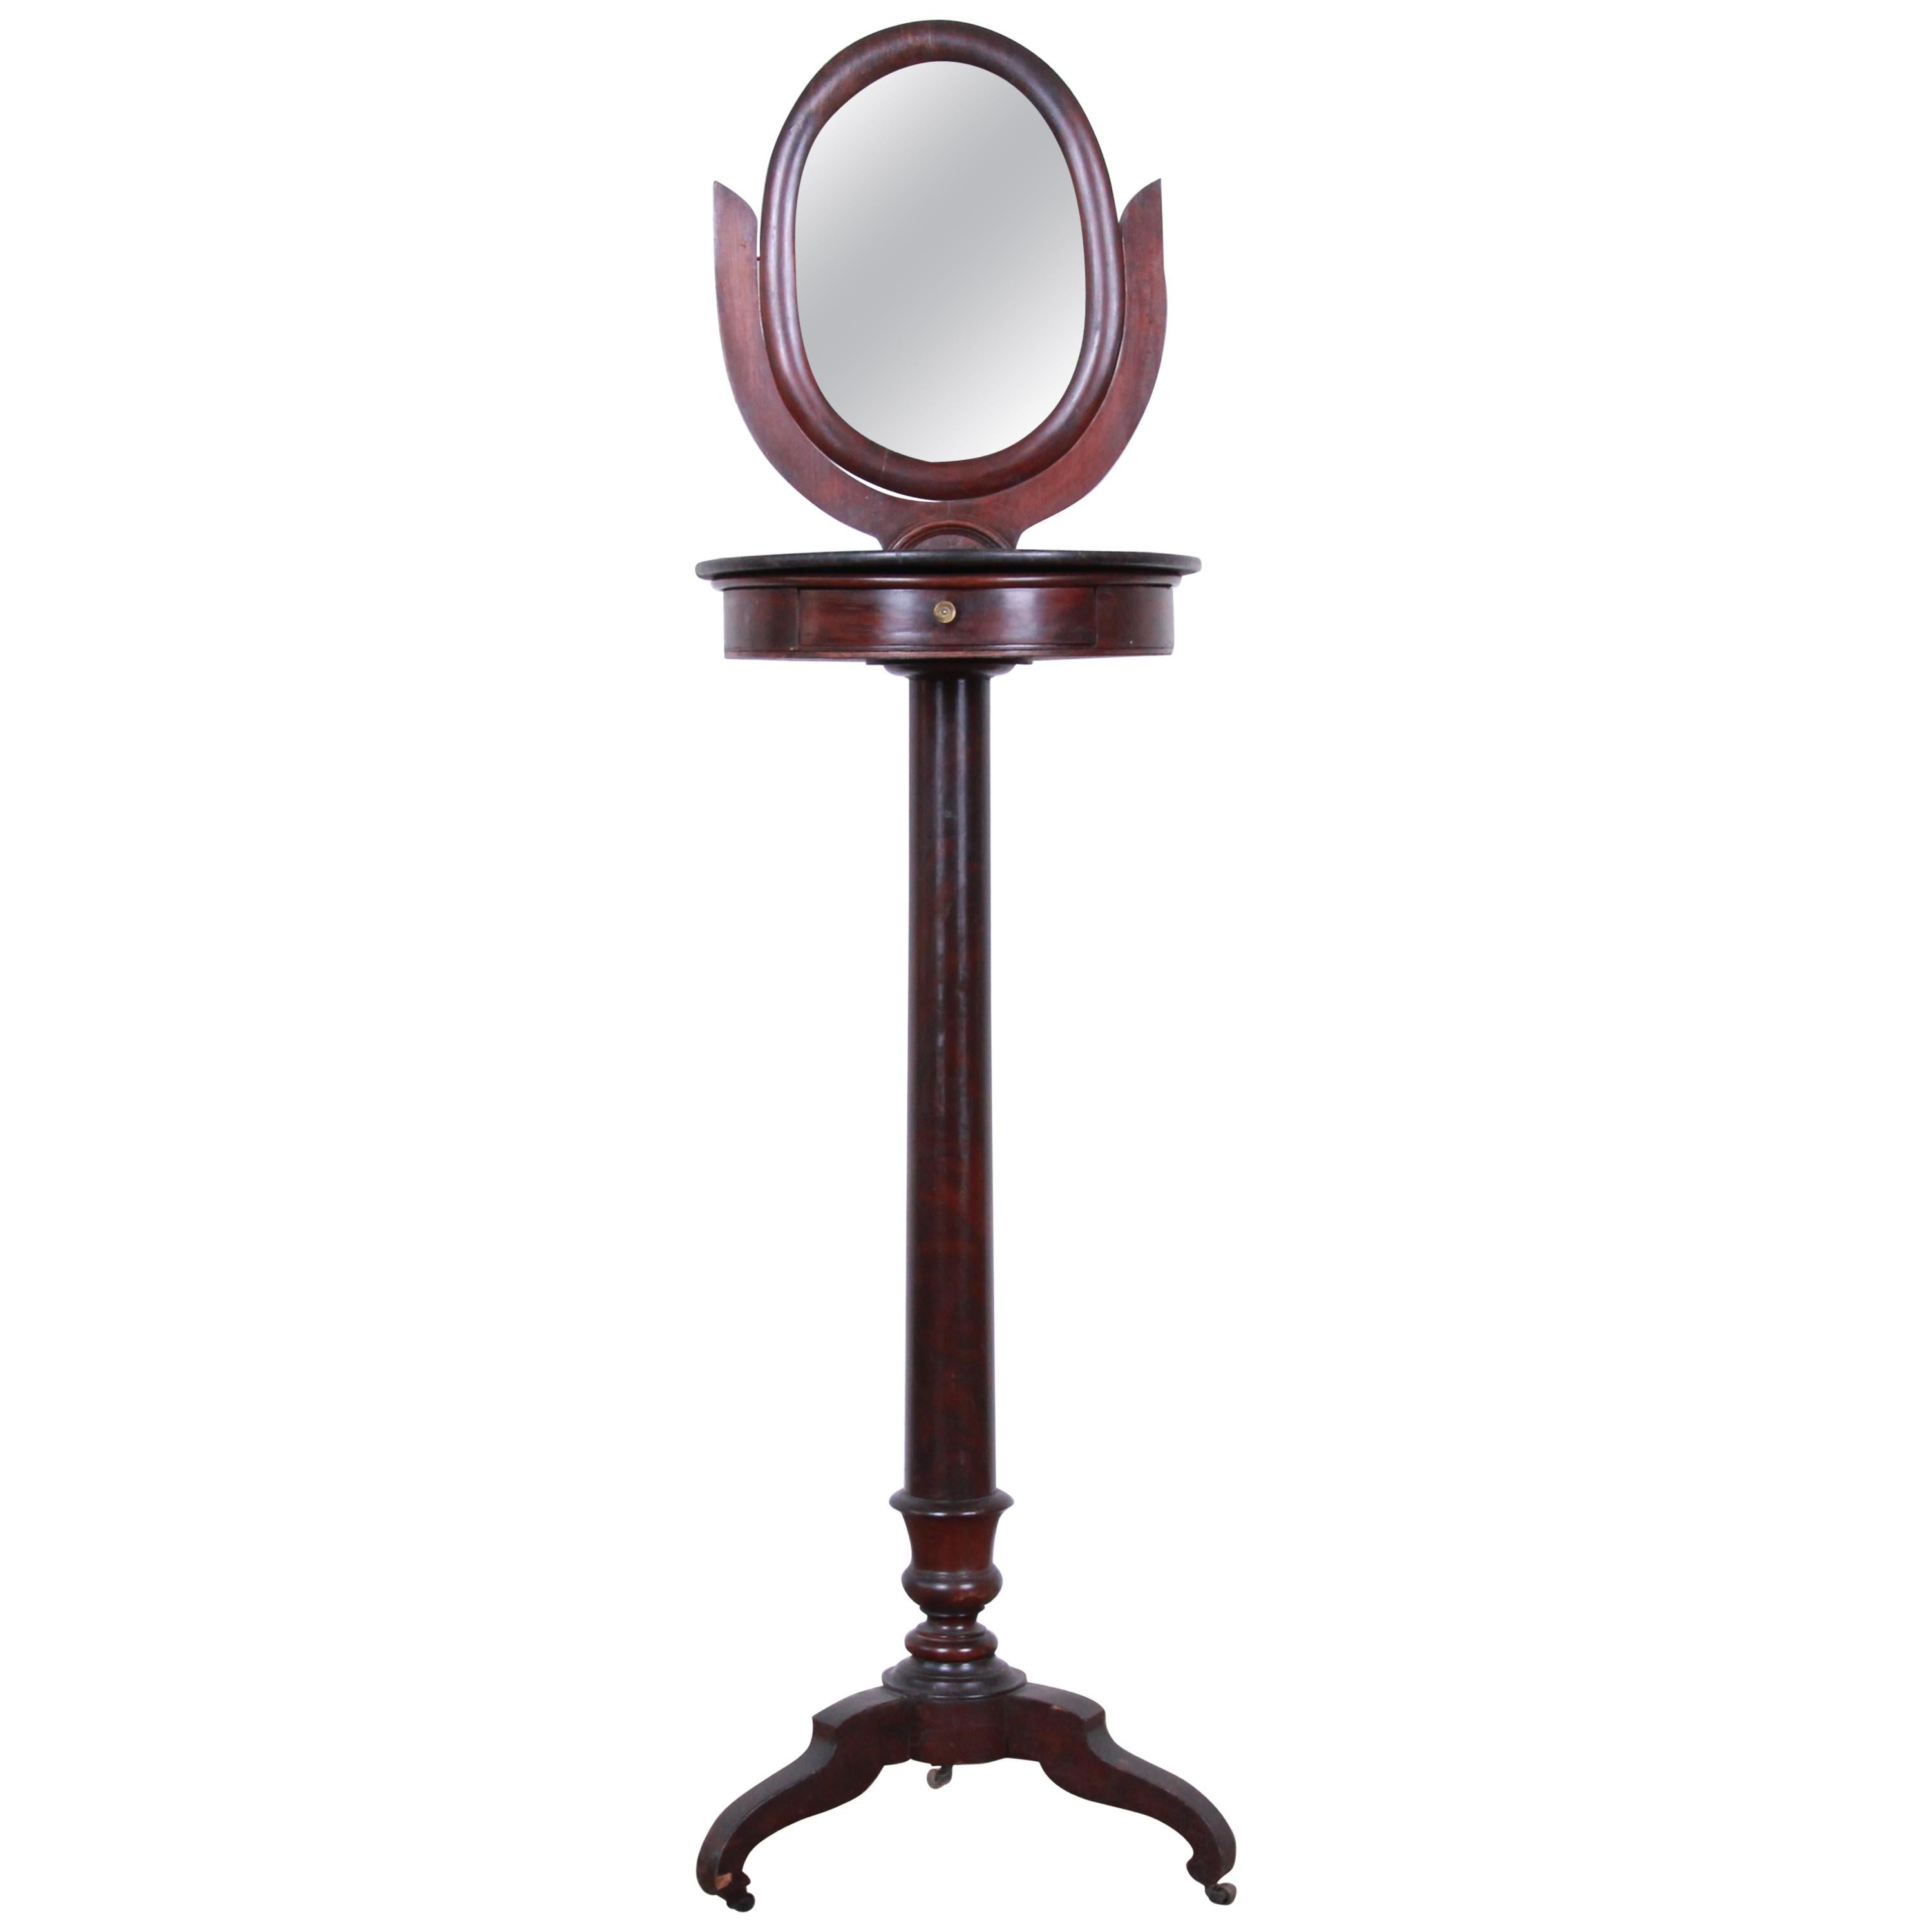 19th Century Victorian Mahogany and Marble Mirrored Shaving Stand